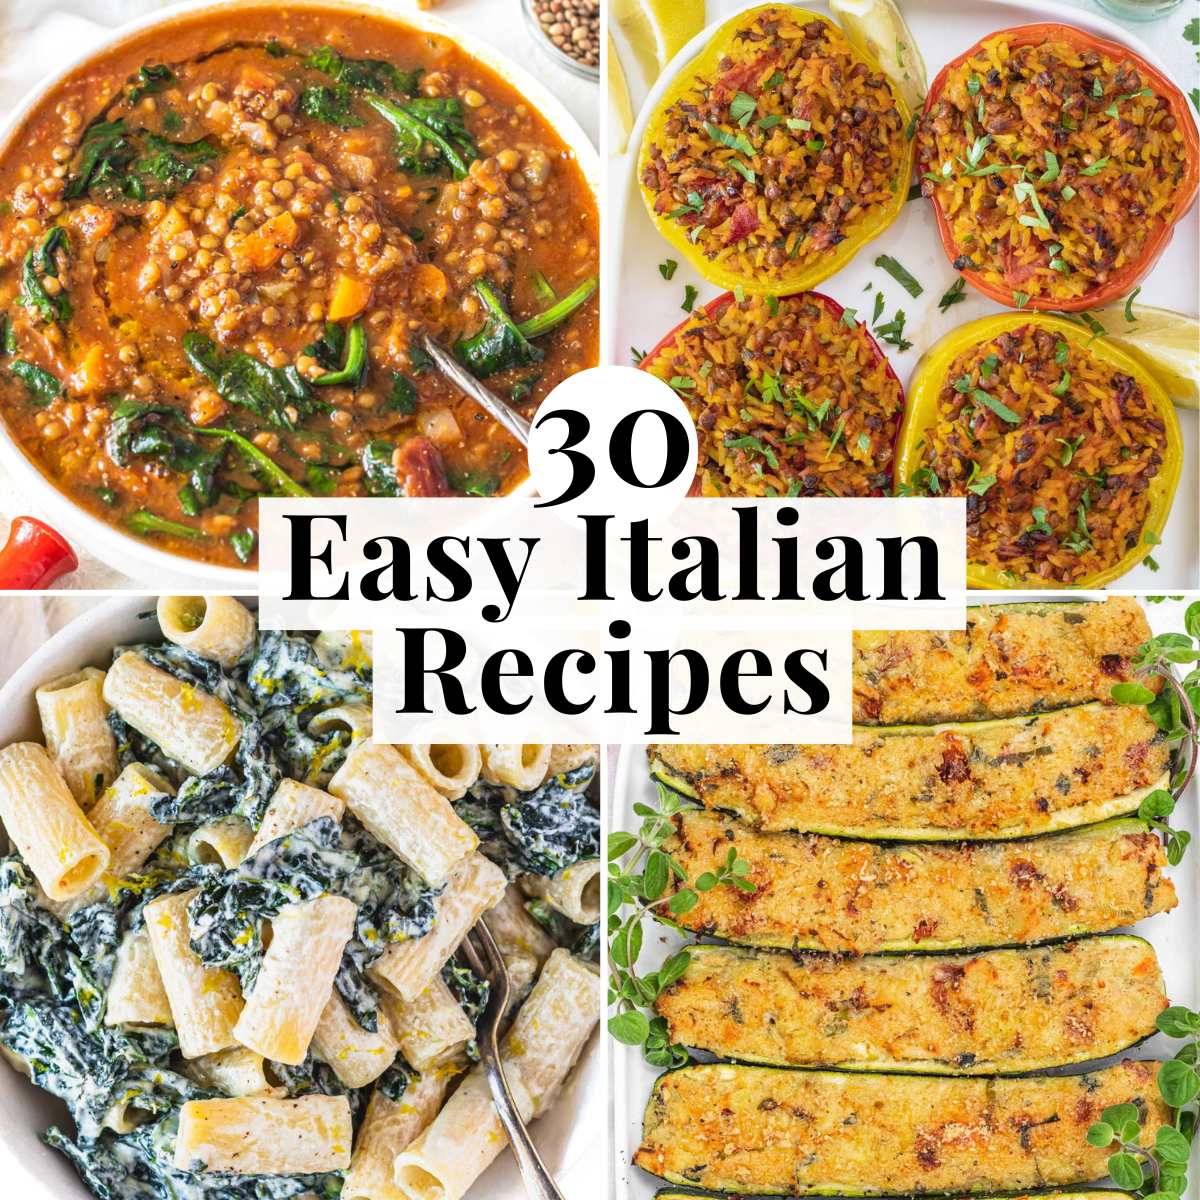 Easy Italian meals with soups, pasta, and stuffed vegetables